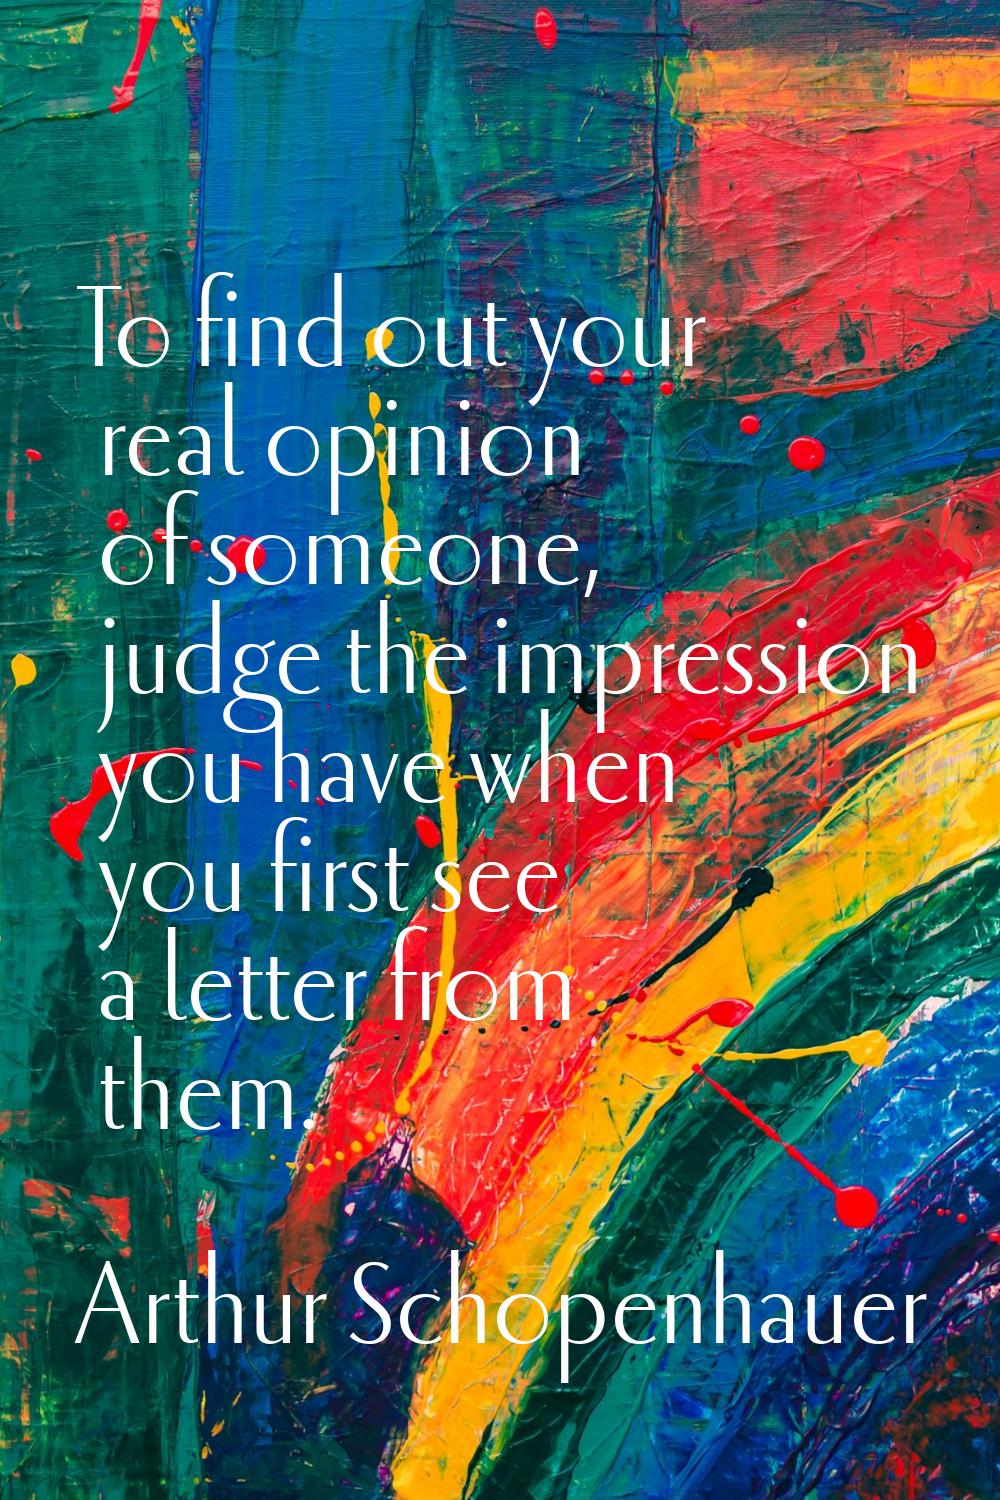 To find out your real opinion of someone, judge the impression you have when you first see a letter